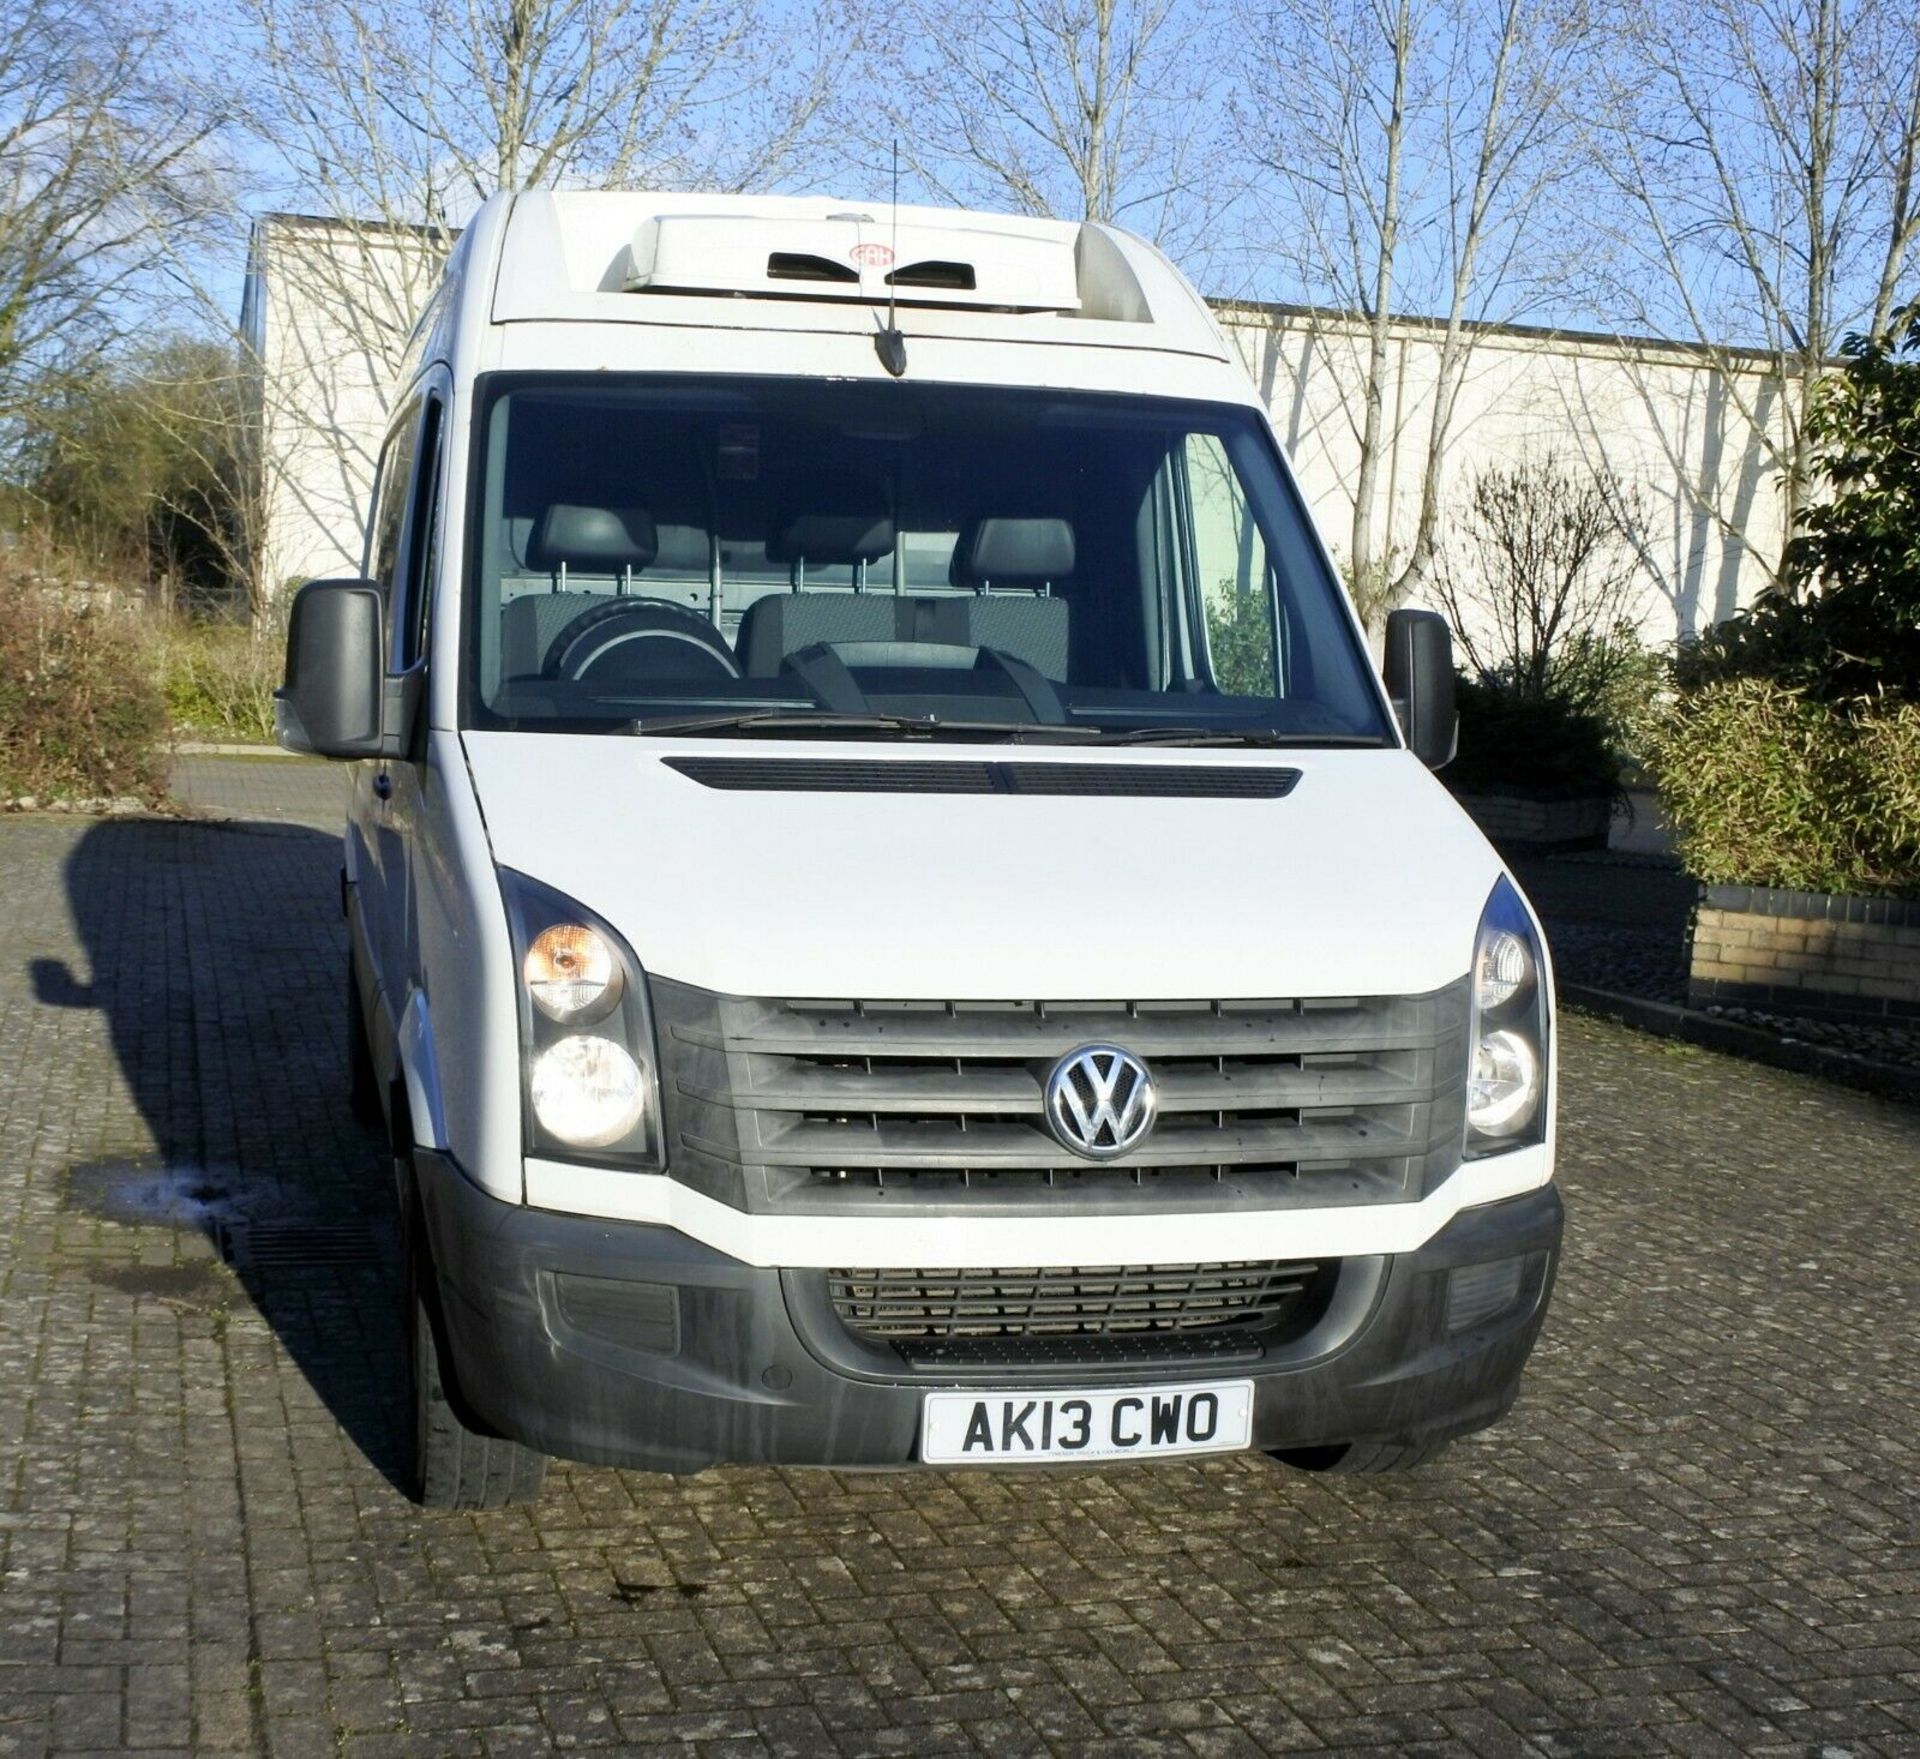 Vw Crafter CR35 TDI 109ps Chiller Van - Image 3 of 12